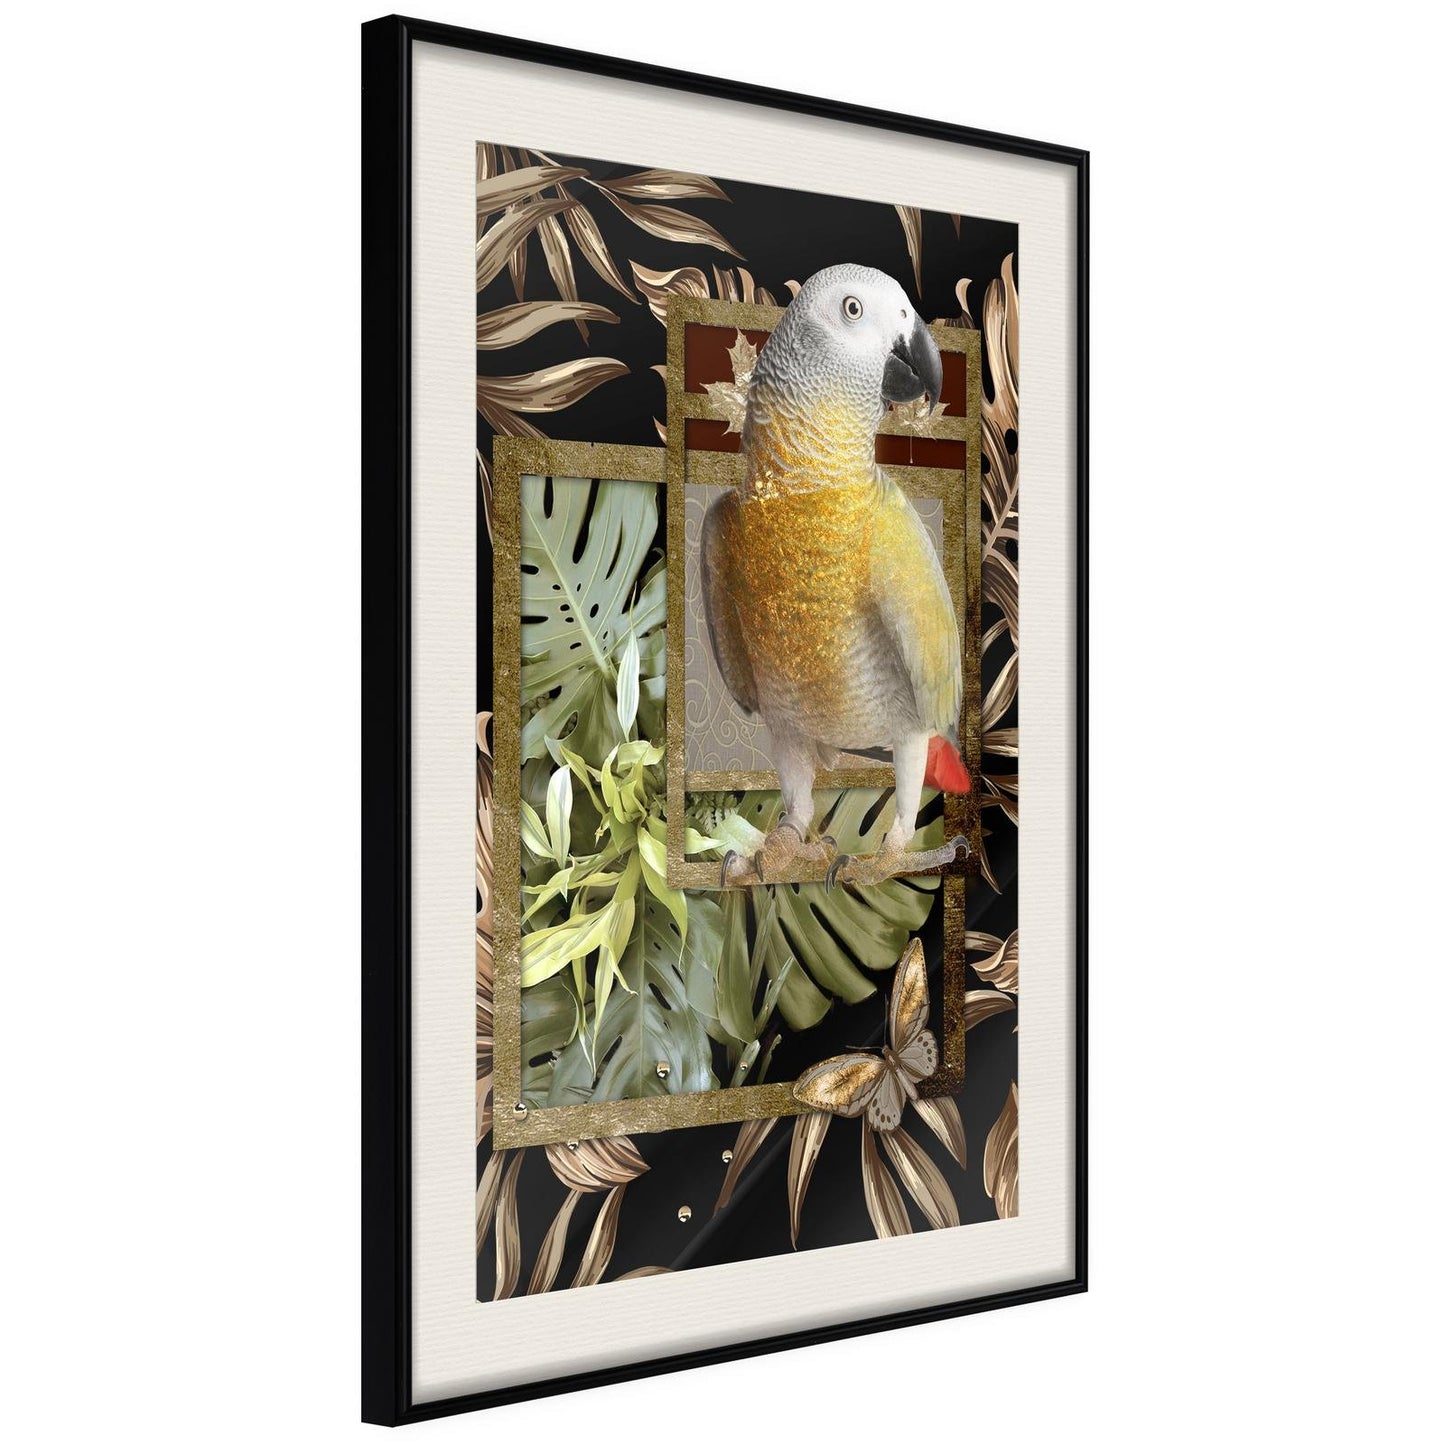 Composition with Gold Parrot